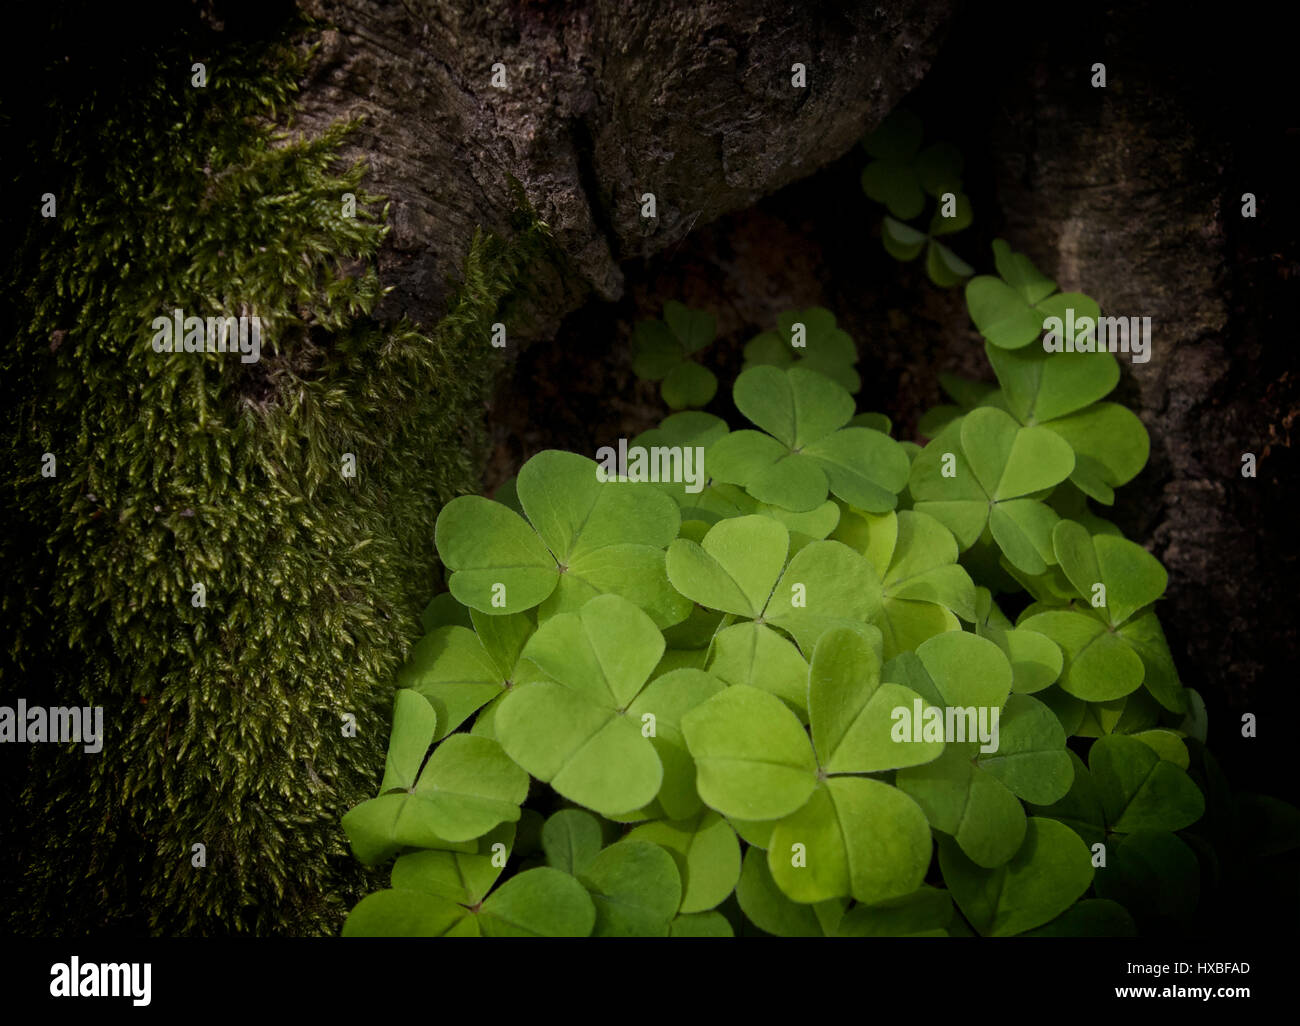 Shamrock. Green clover leaves grow under roots in carpathian forest Stock Photo